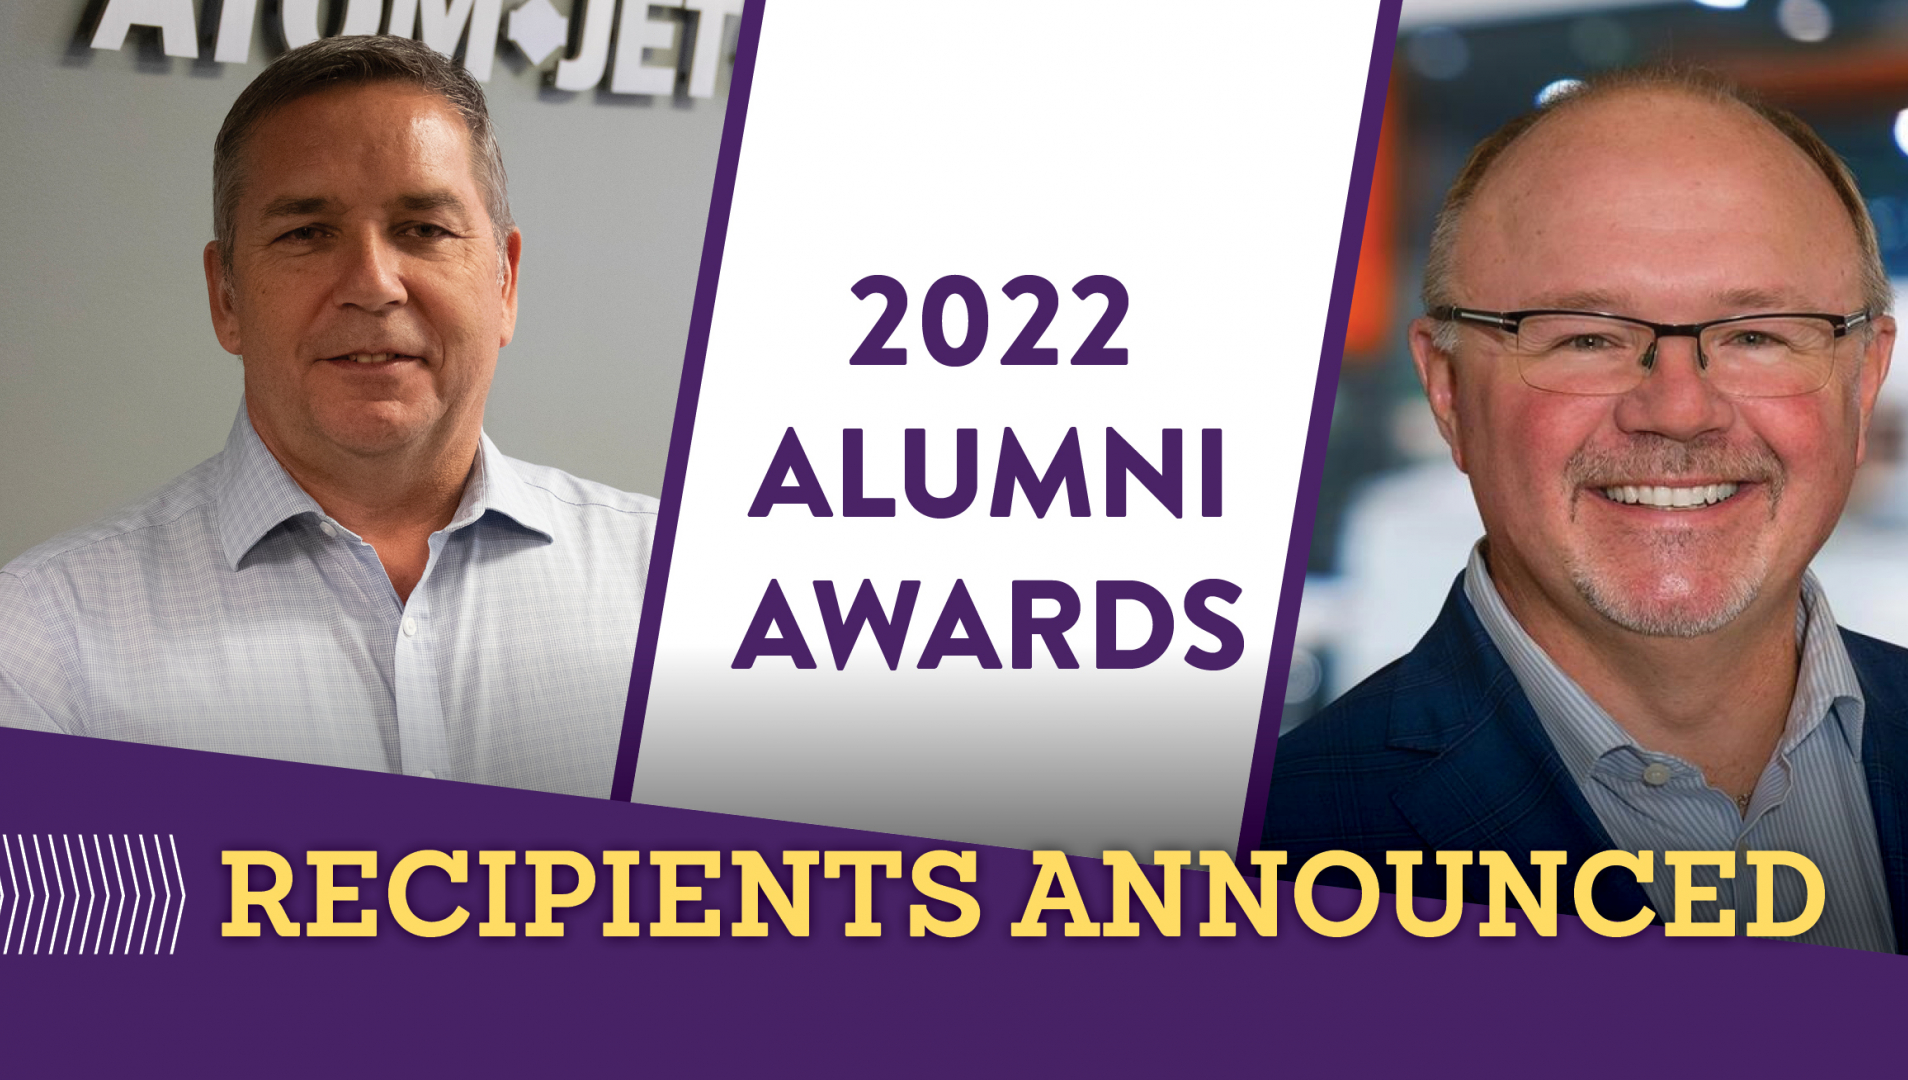 A designed image shows a photo of alumni award recipient, Barry Larocque on the left side and Tere Stykalo on the right. Between them, a white space that says "2022 Alumni awards" and below, "Recipients Announced"